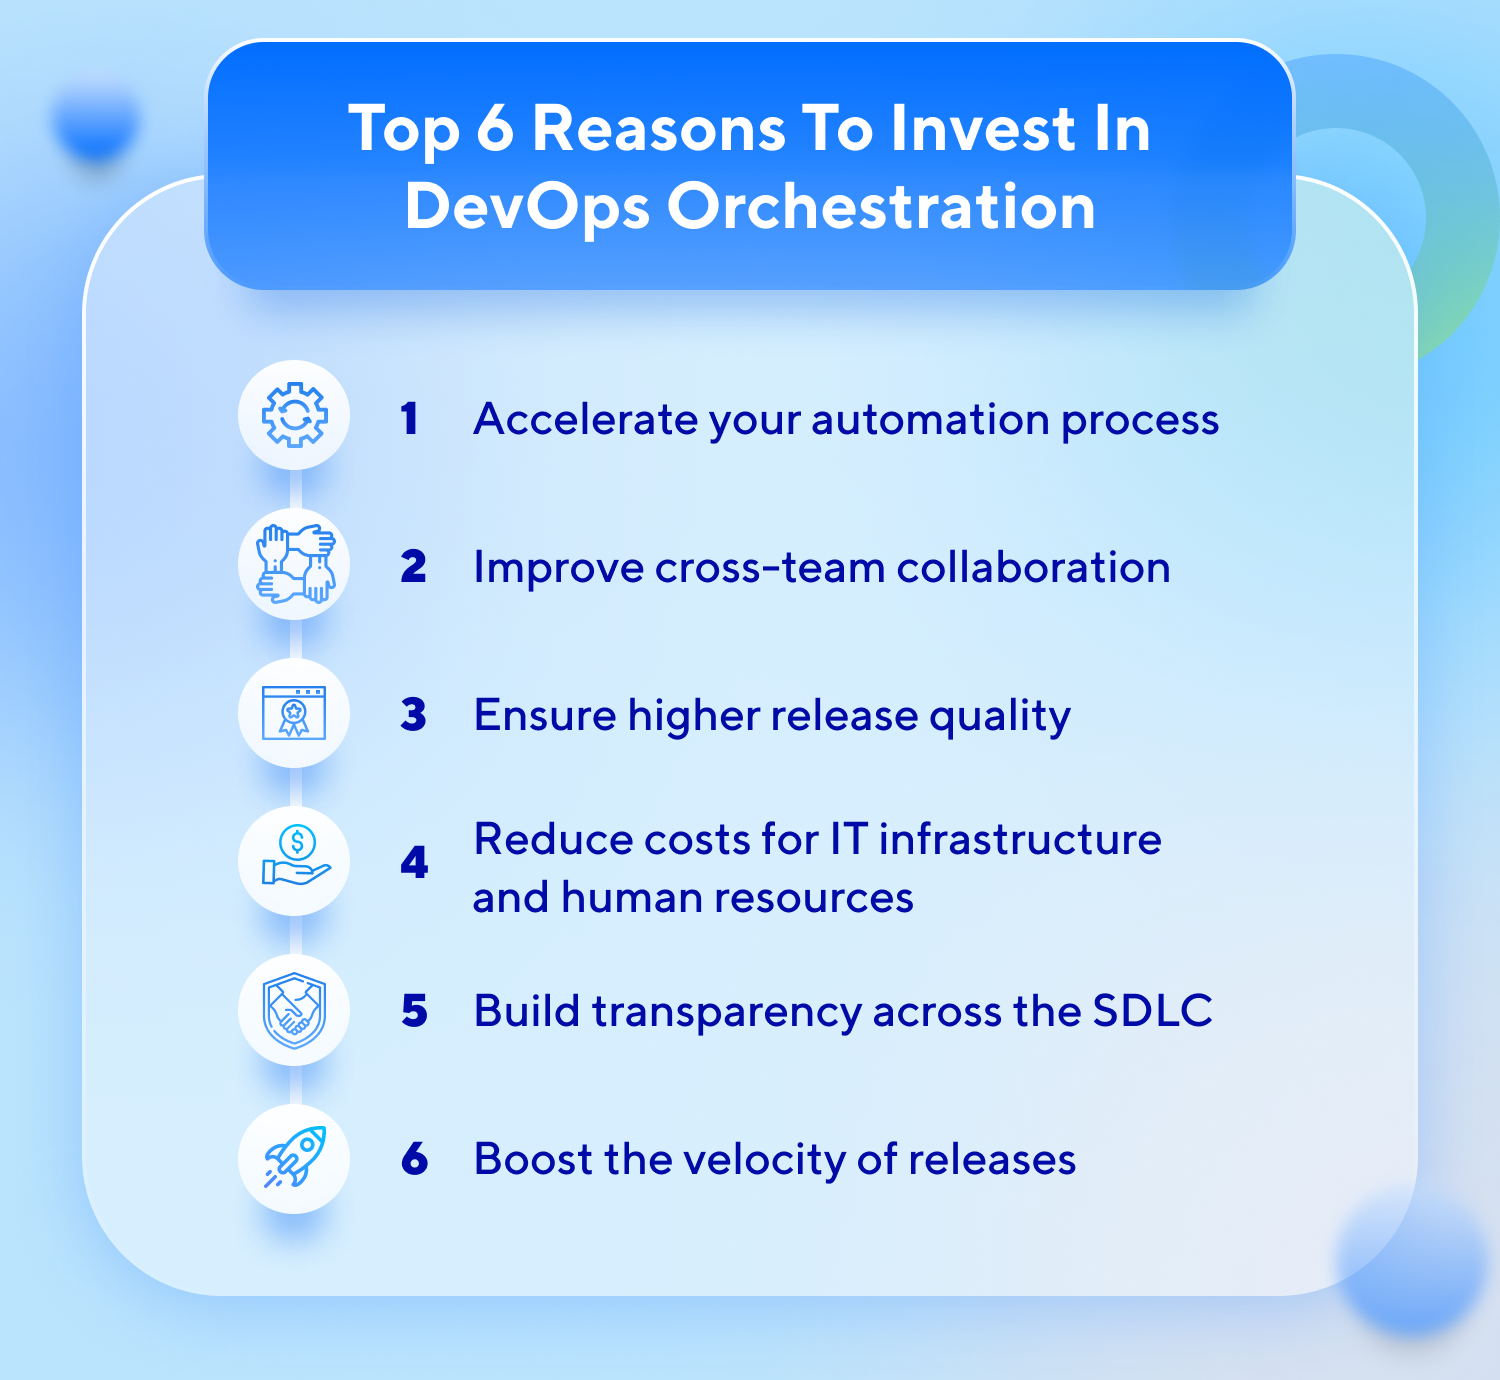 Top 6 reasons to invest in DevOps orchestration